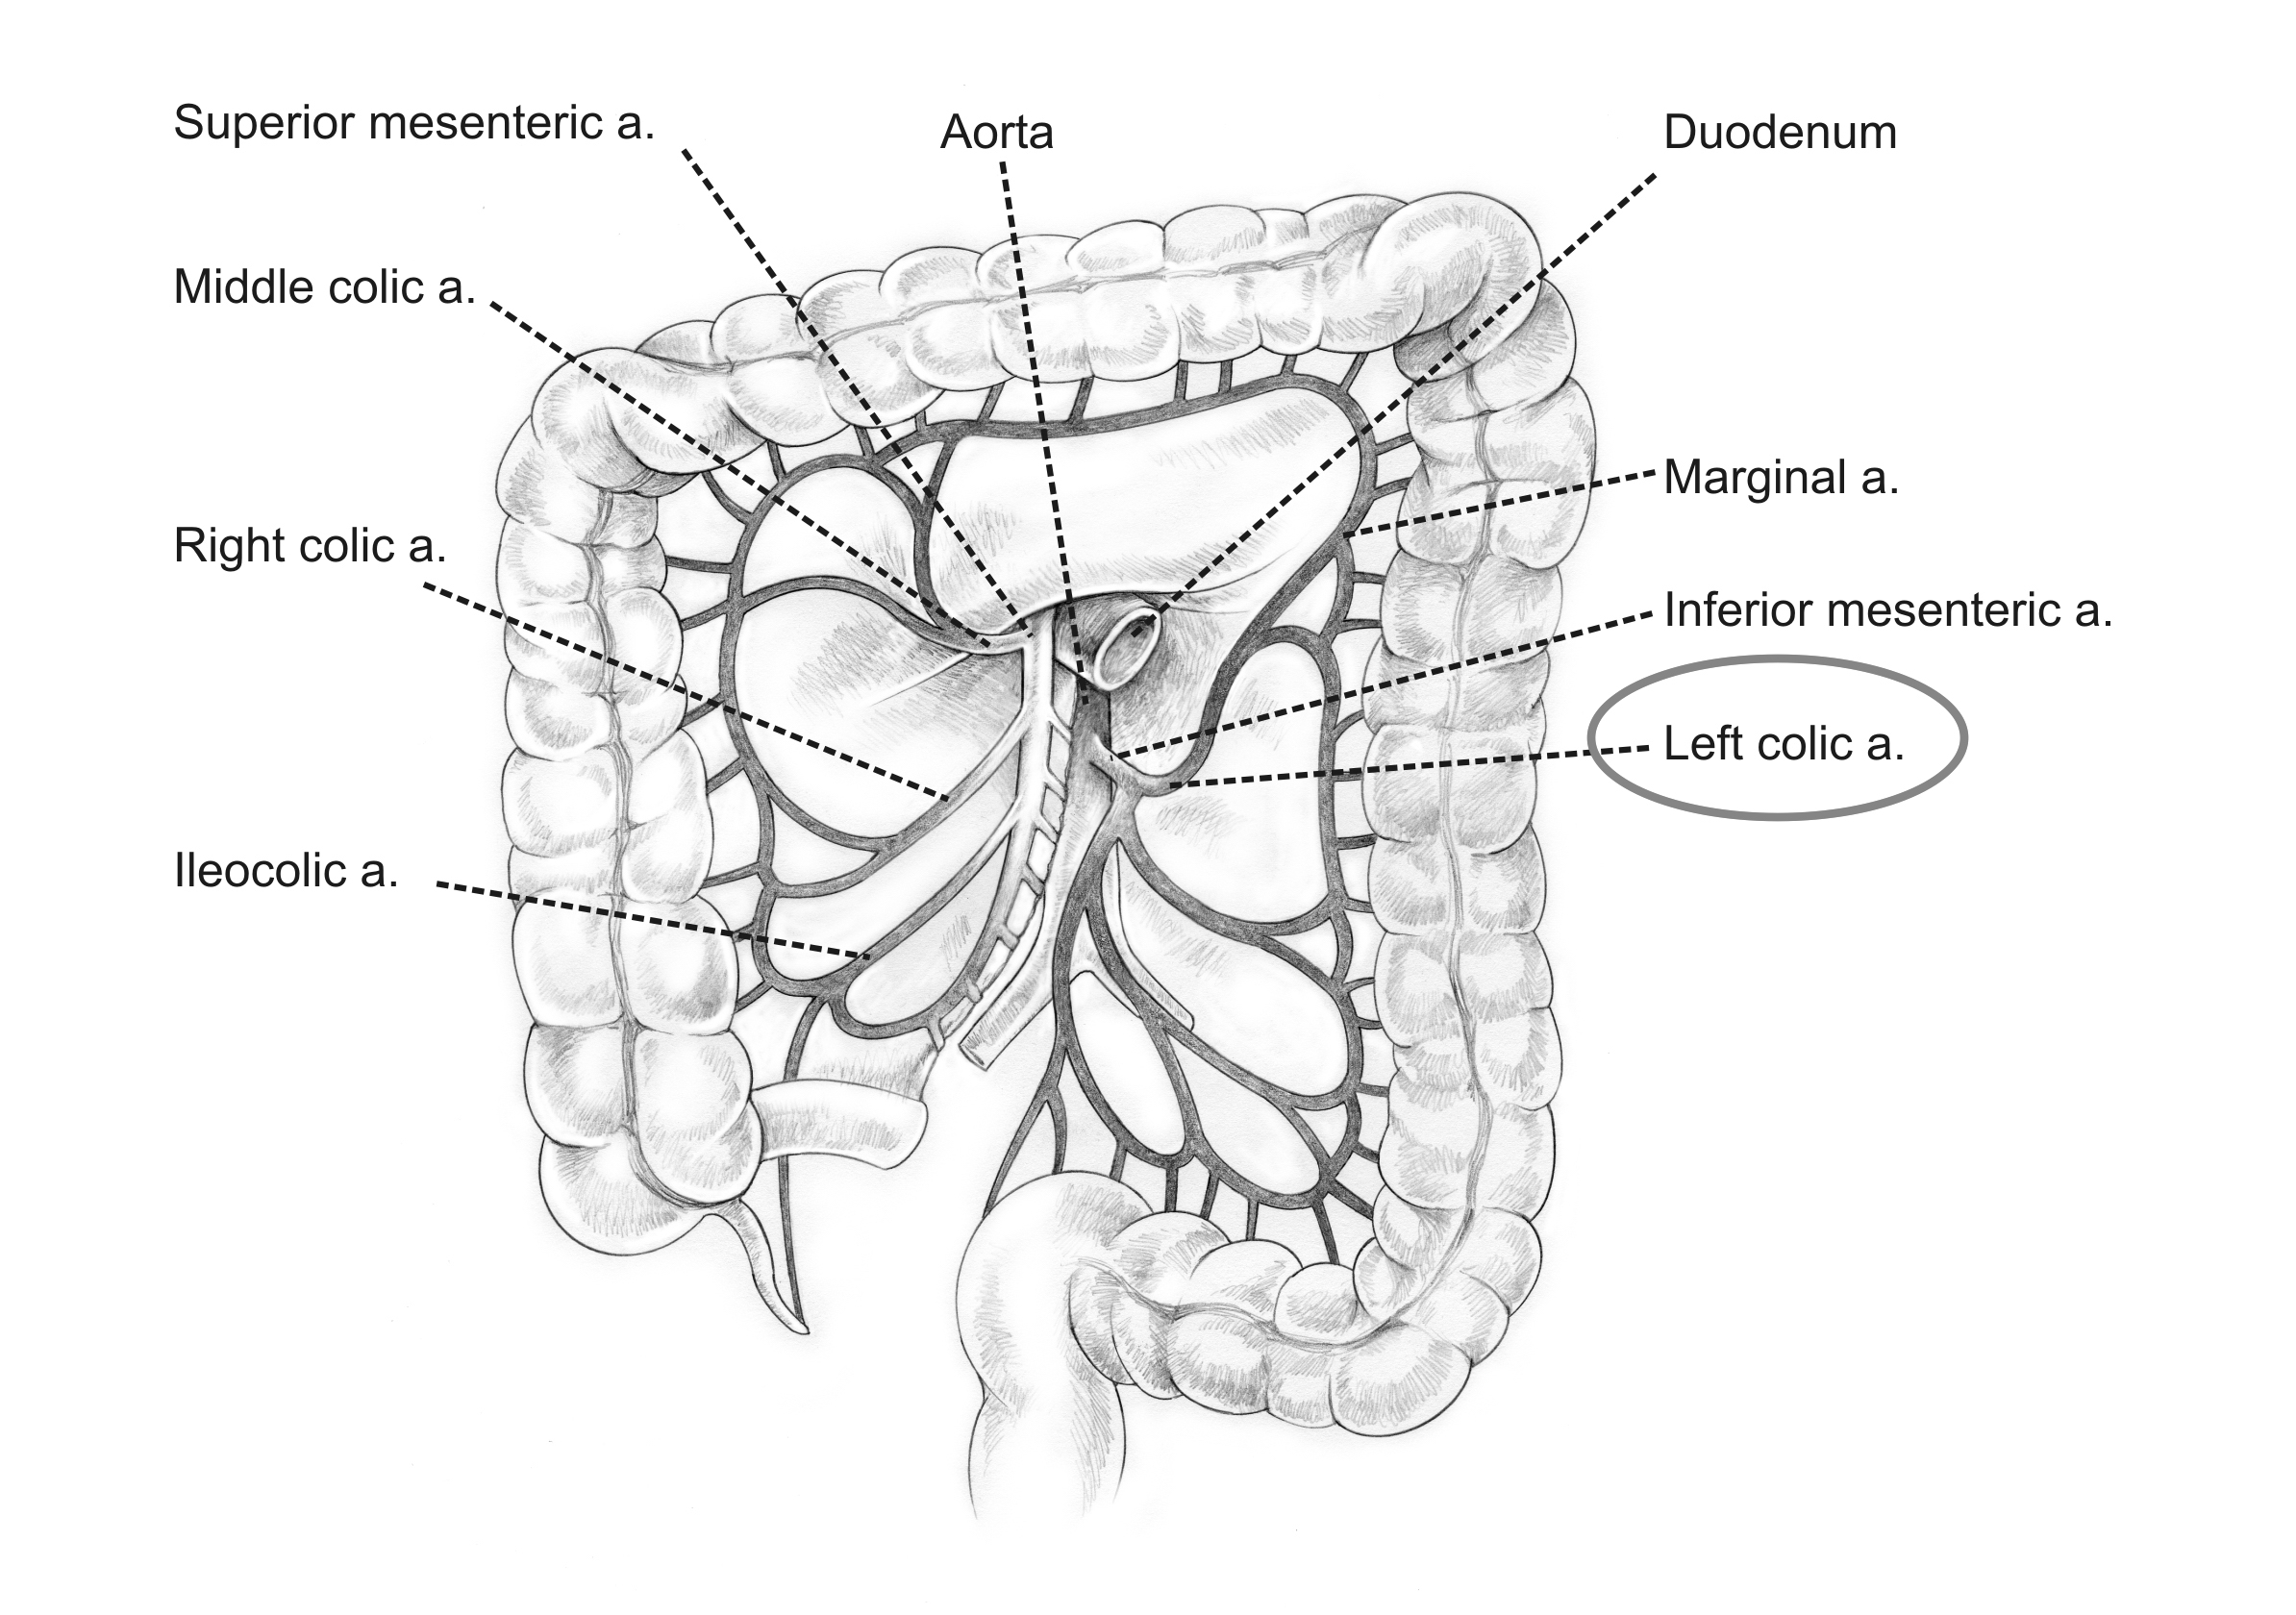 Anatomical location of the left colic artery (source)